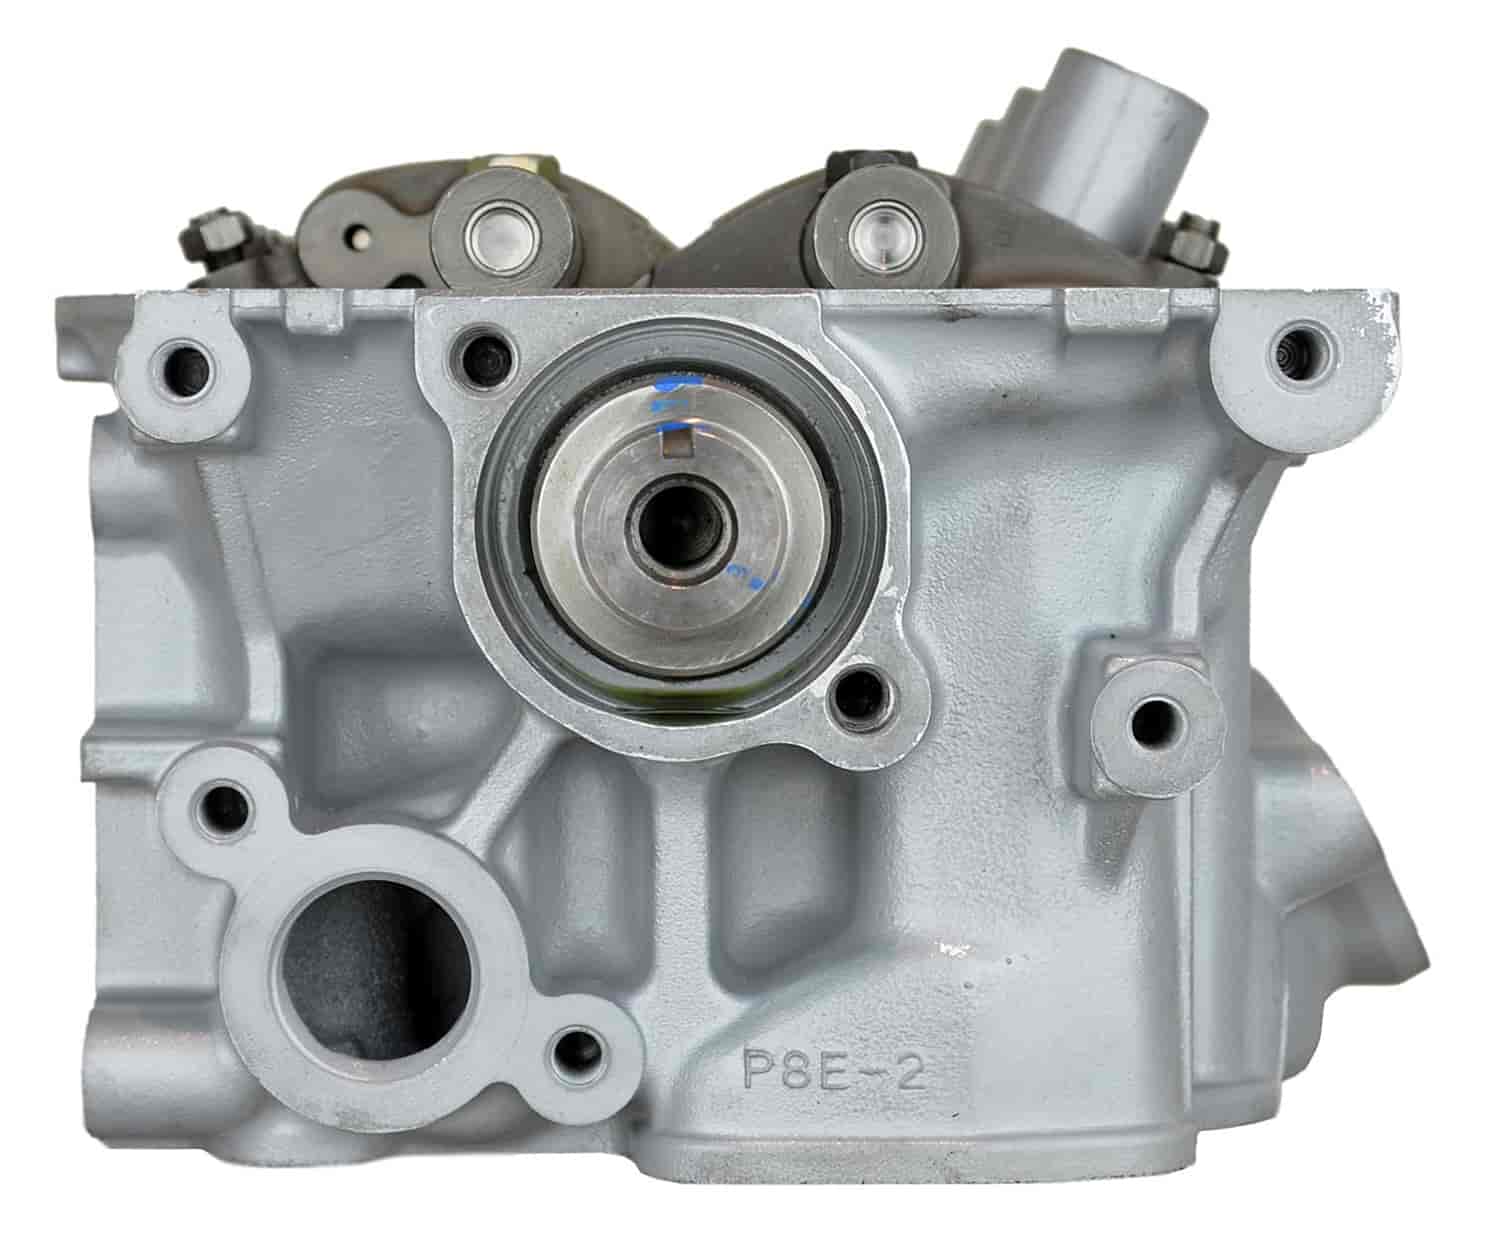 Remanufactured Cylinder Head for 1999-2004 Acura/Honda with 3.2/3.5L V6 J32A1/J35A